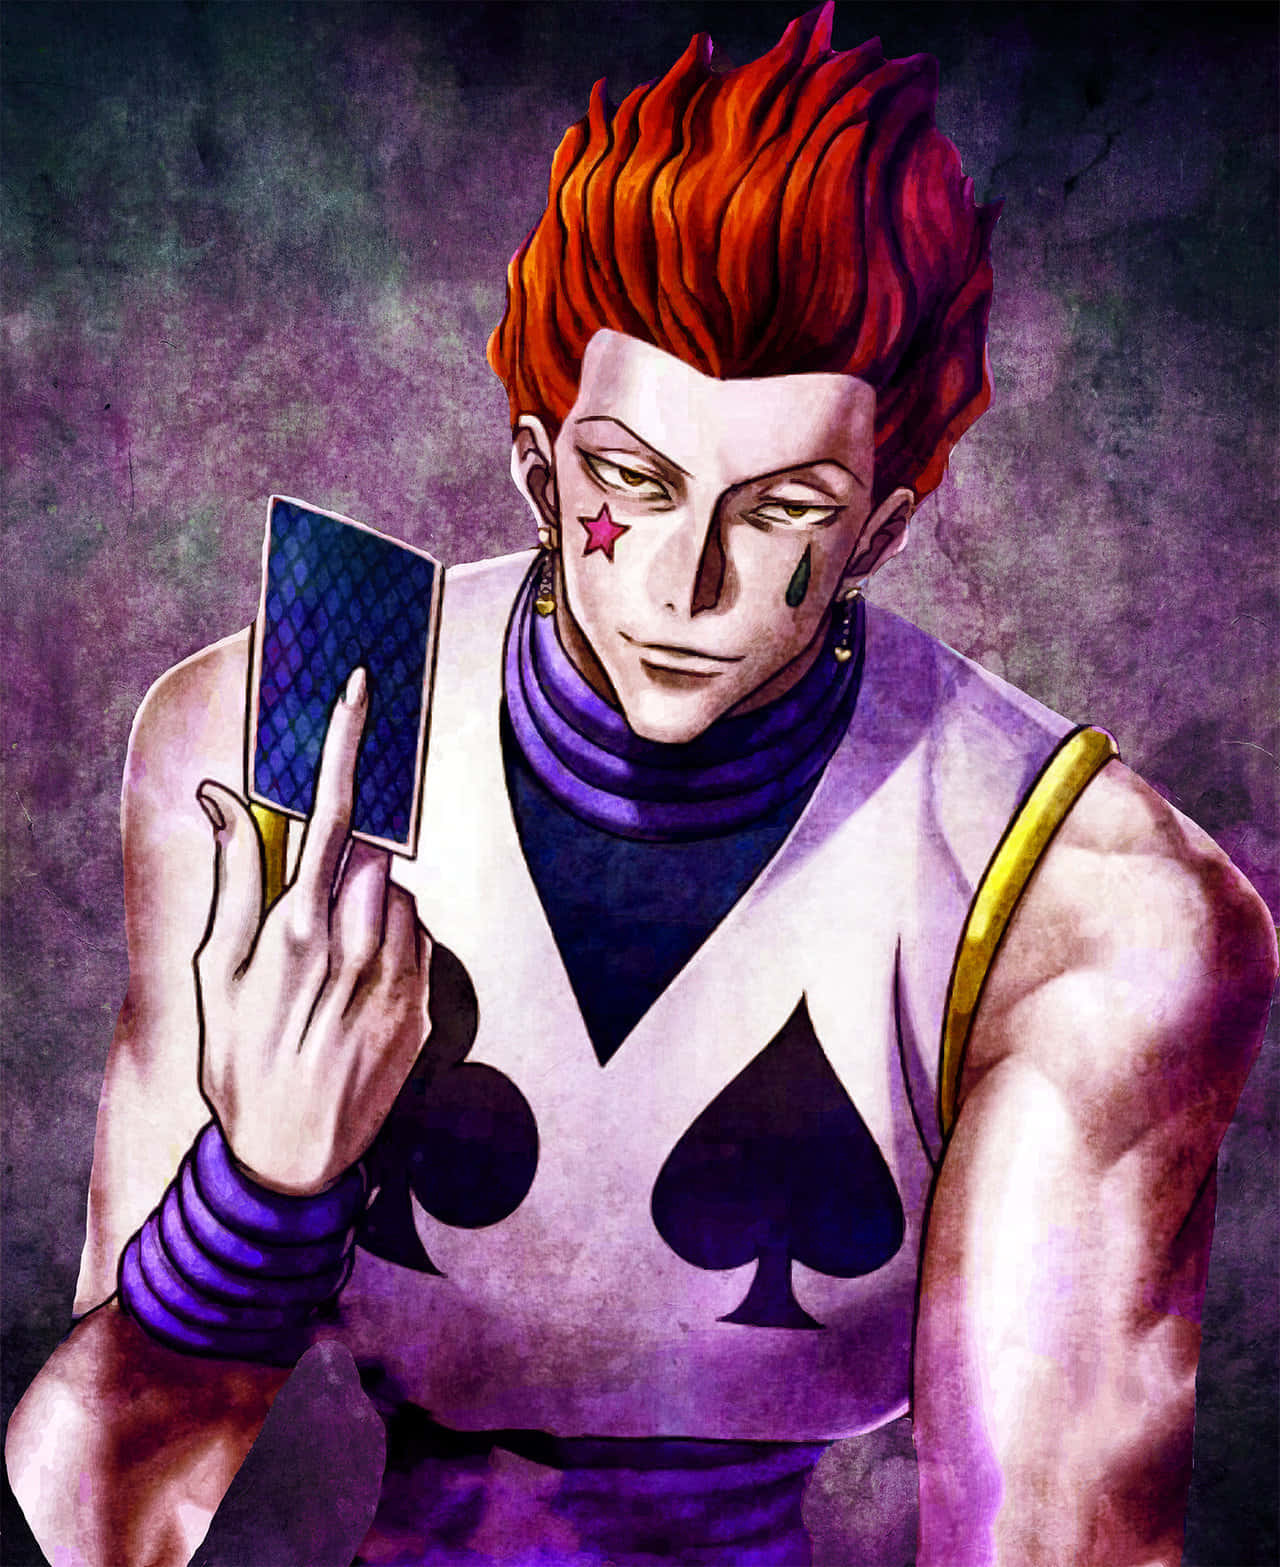 Experience Fun and Mischievousness with Hisoka!